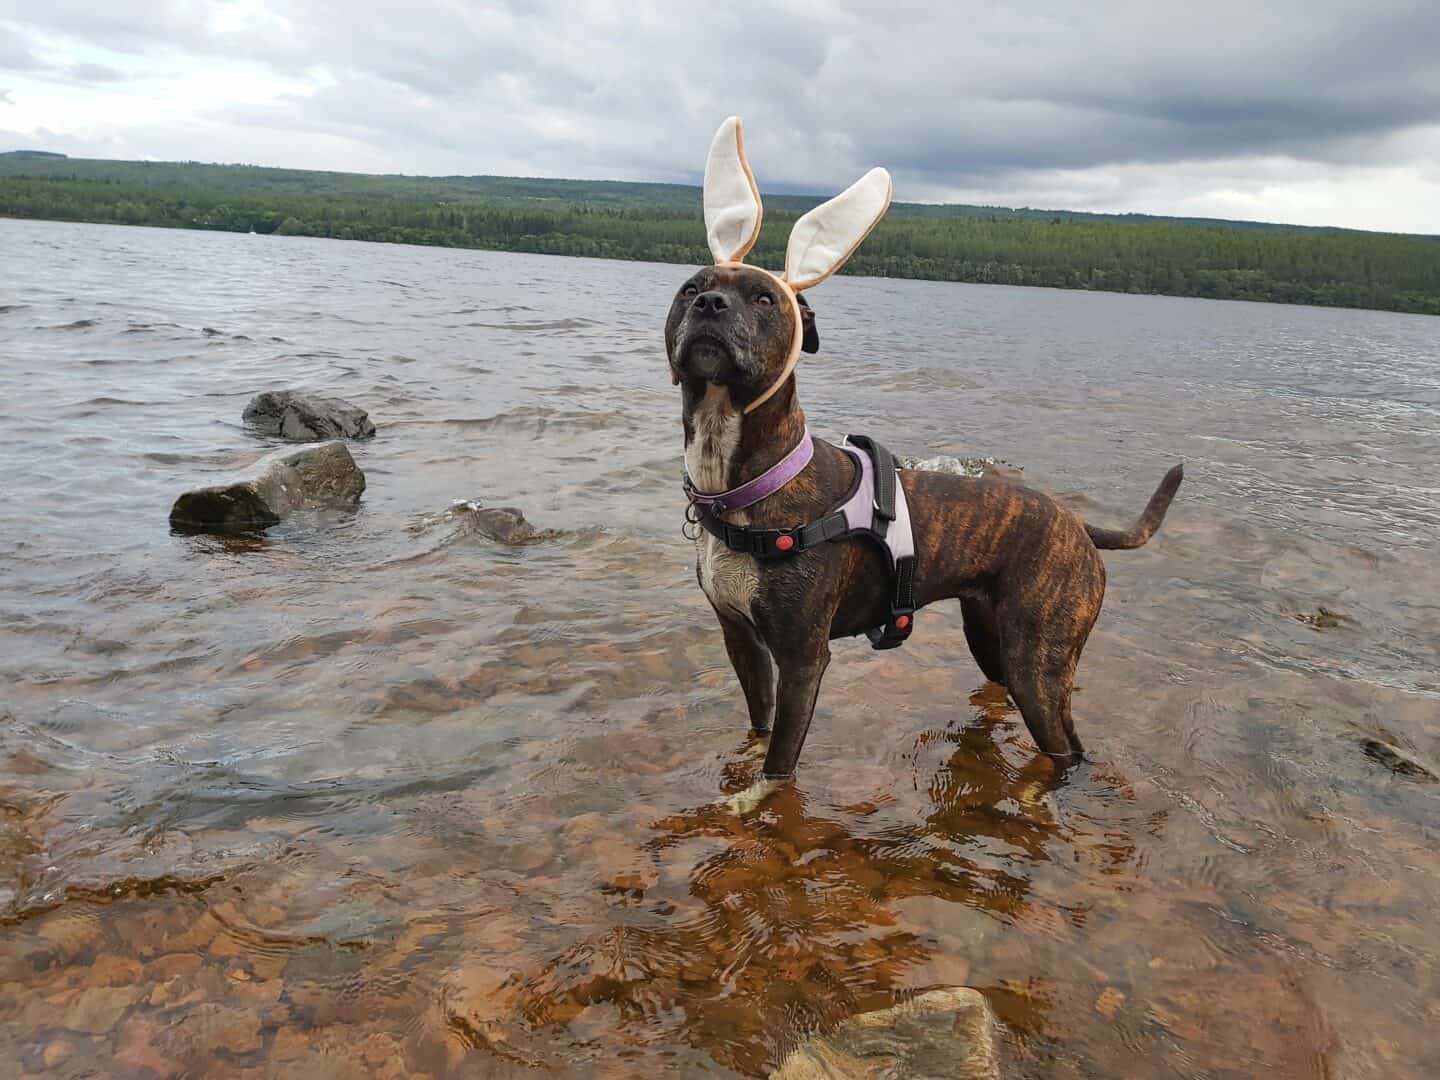 Dog standing in the shallow waters of Loch Ness wearing a purple harness and collar and a bunny ears hair band. Opposite bank of the Loch in background covered in dense forest.  